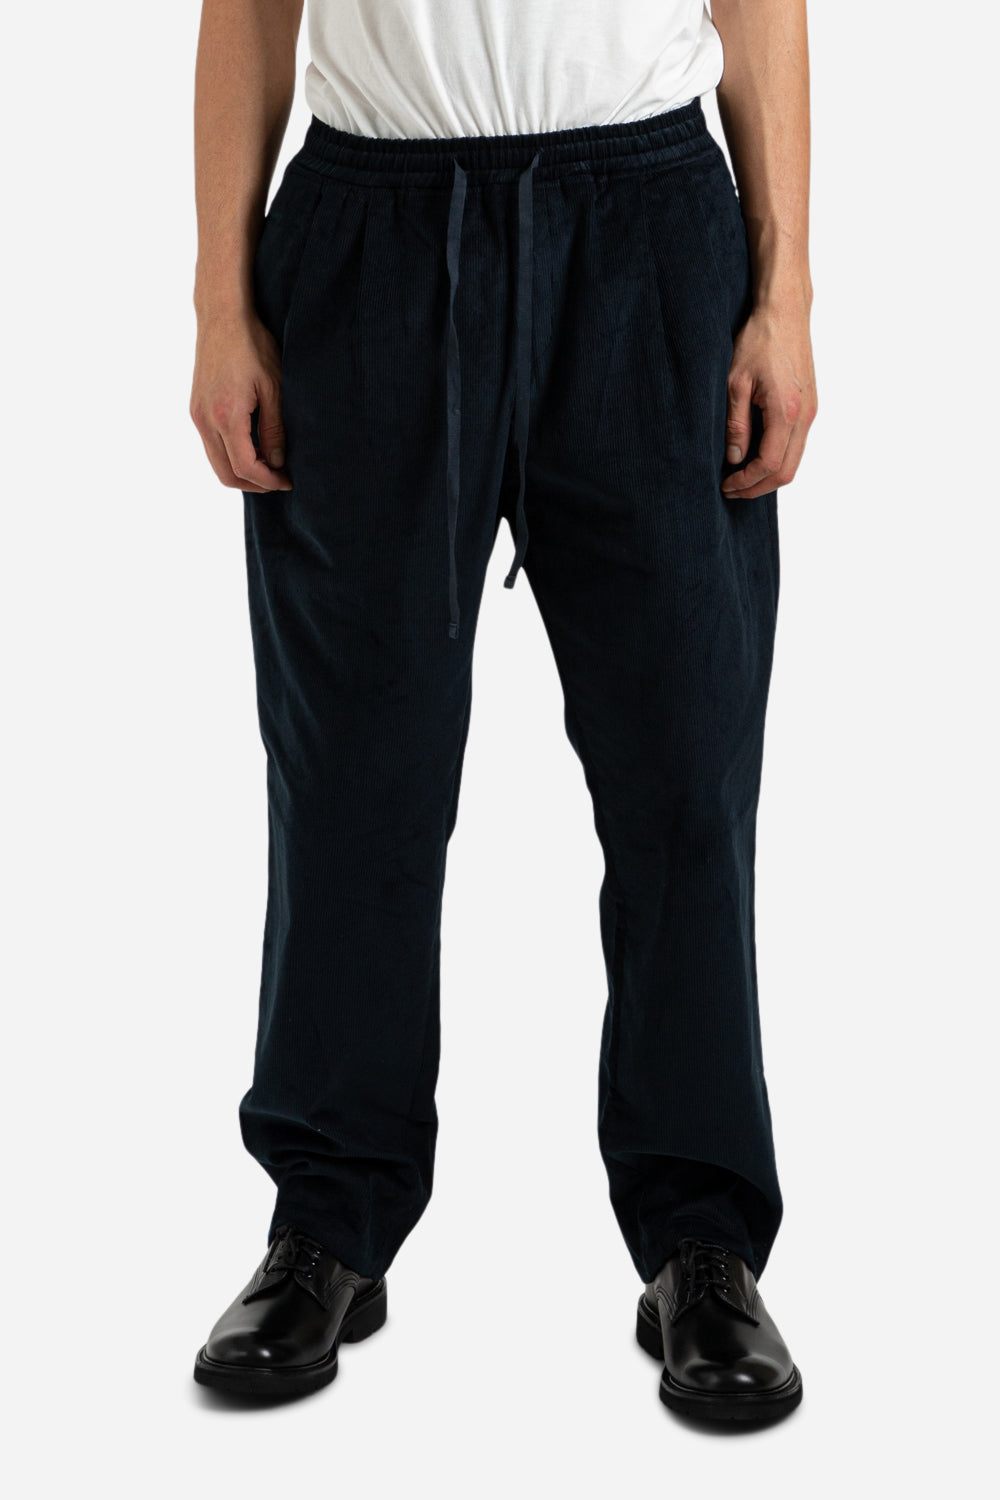 frizmworks_corduroy_relax_pants_set_up_two_tuck_pants_navy